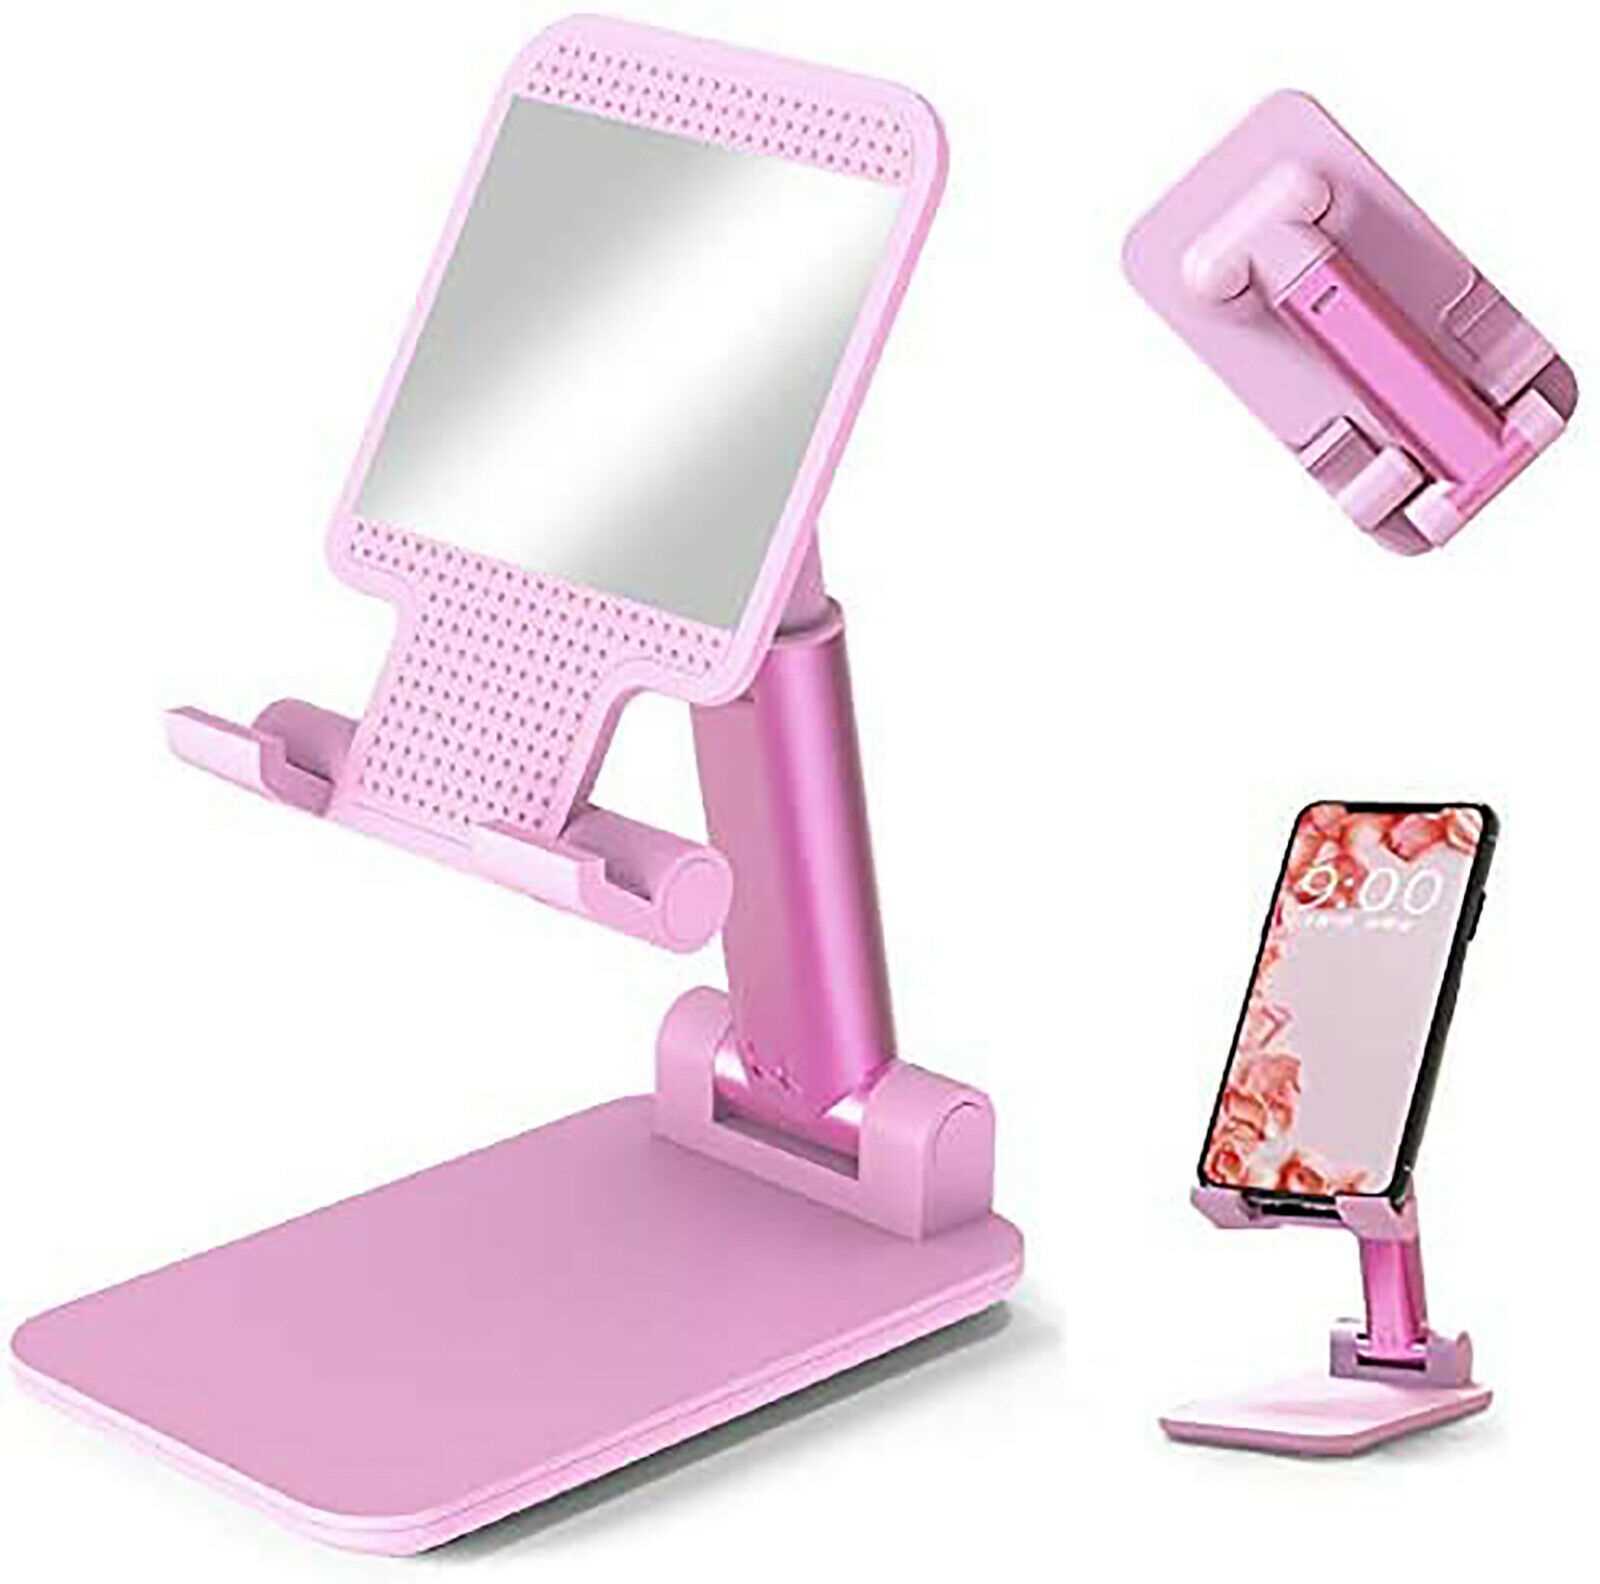 Pink Portable Mobile Phone Stand Desktop Holder Table Desk Mount For iPhone iPad Tab